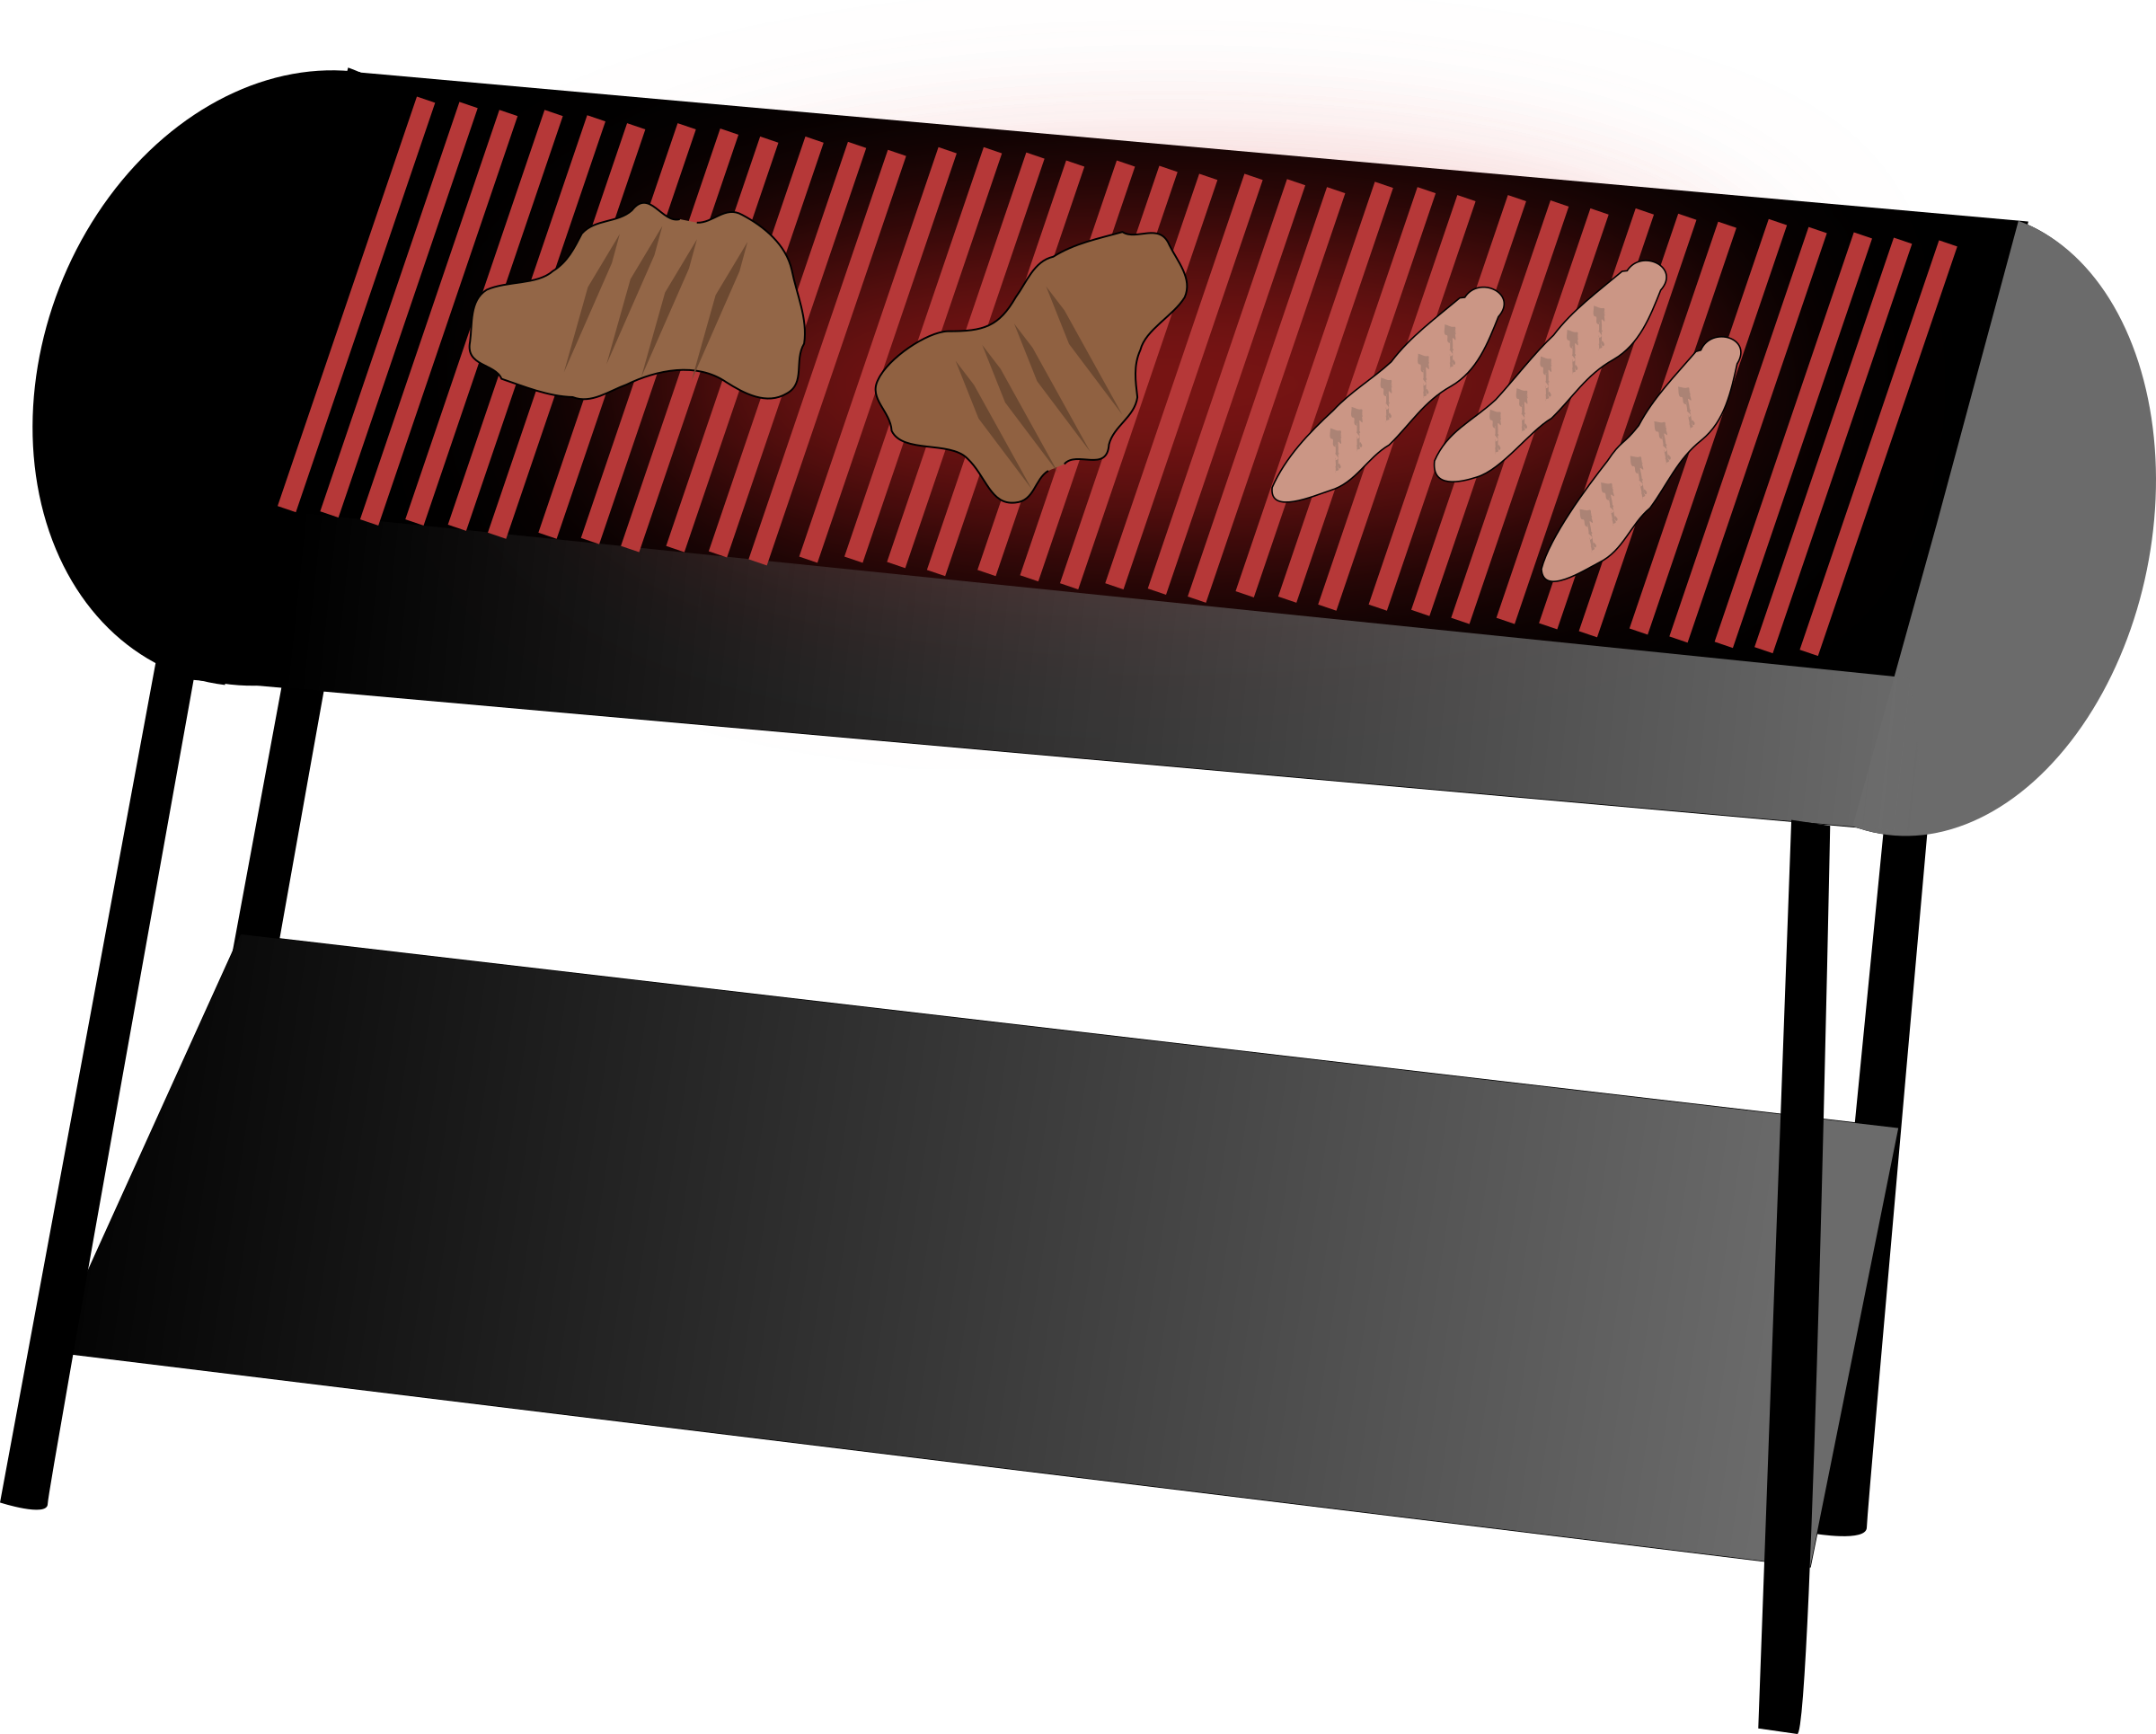 Grill clipart grill top. Simple bbq icons png